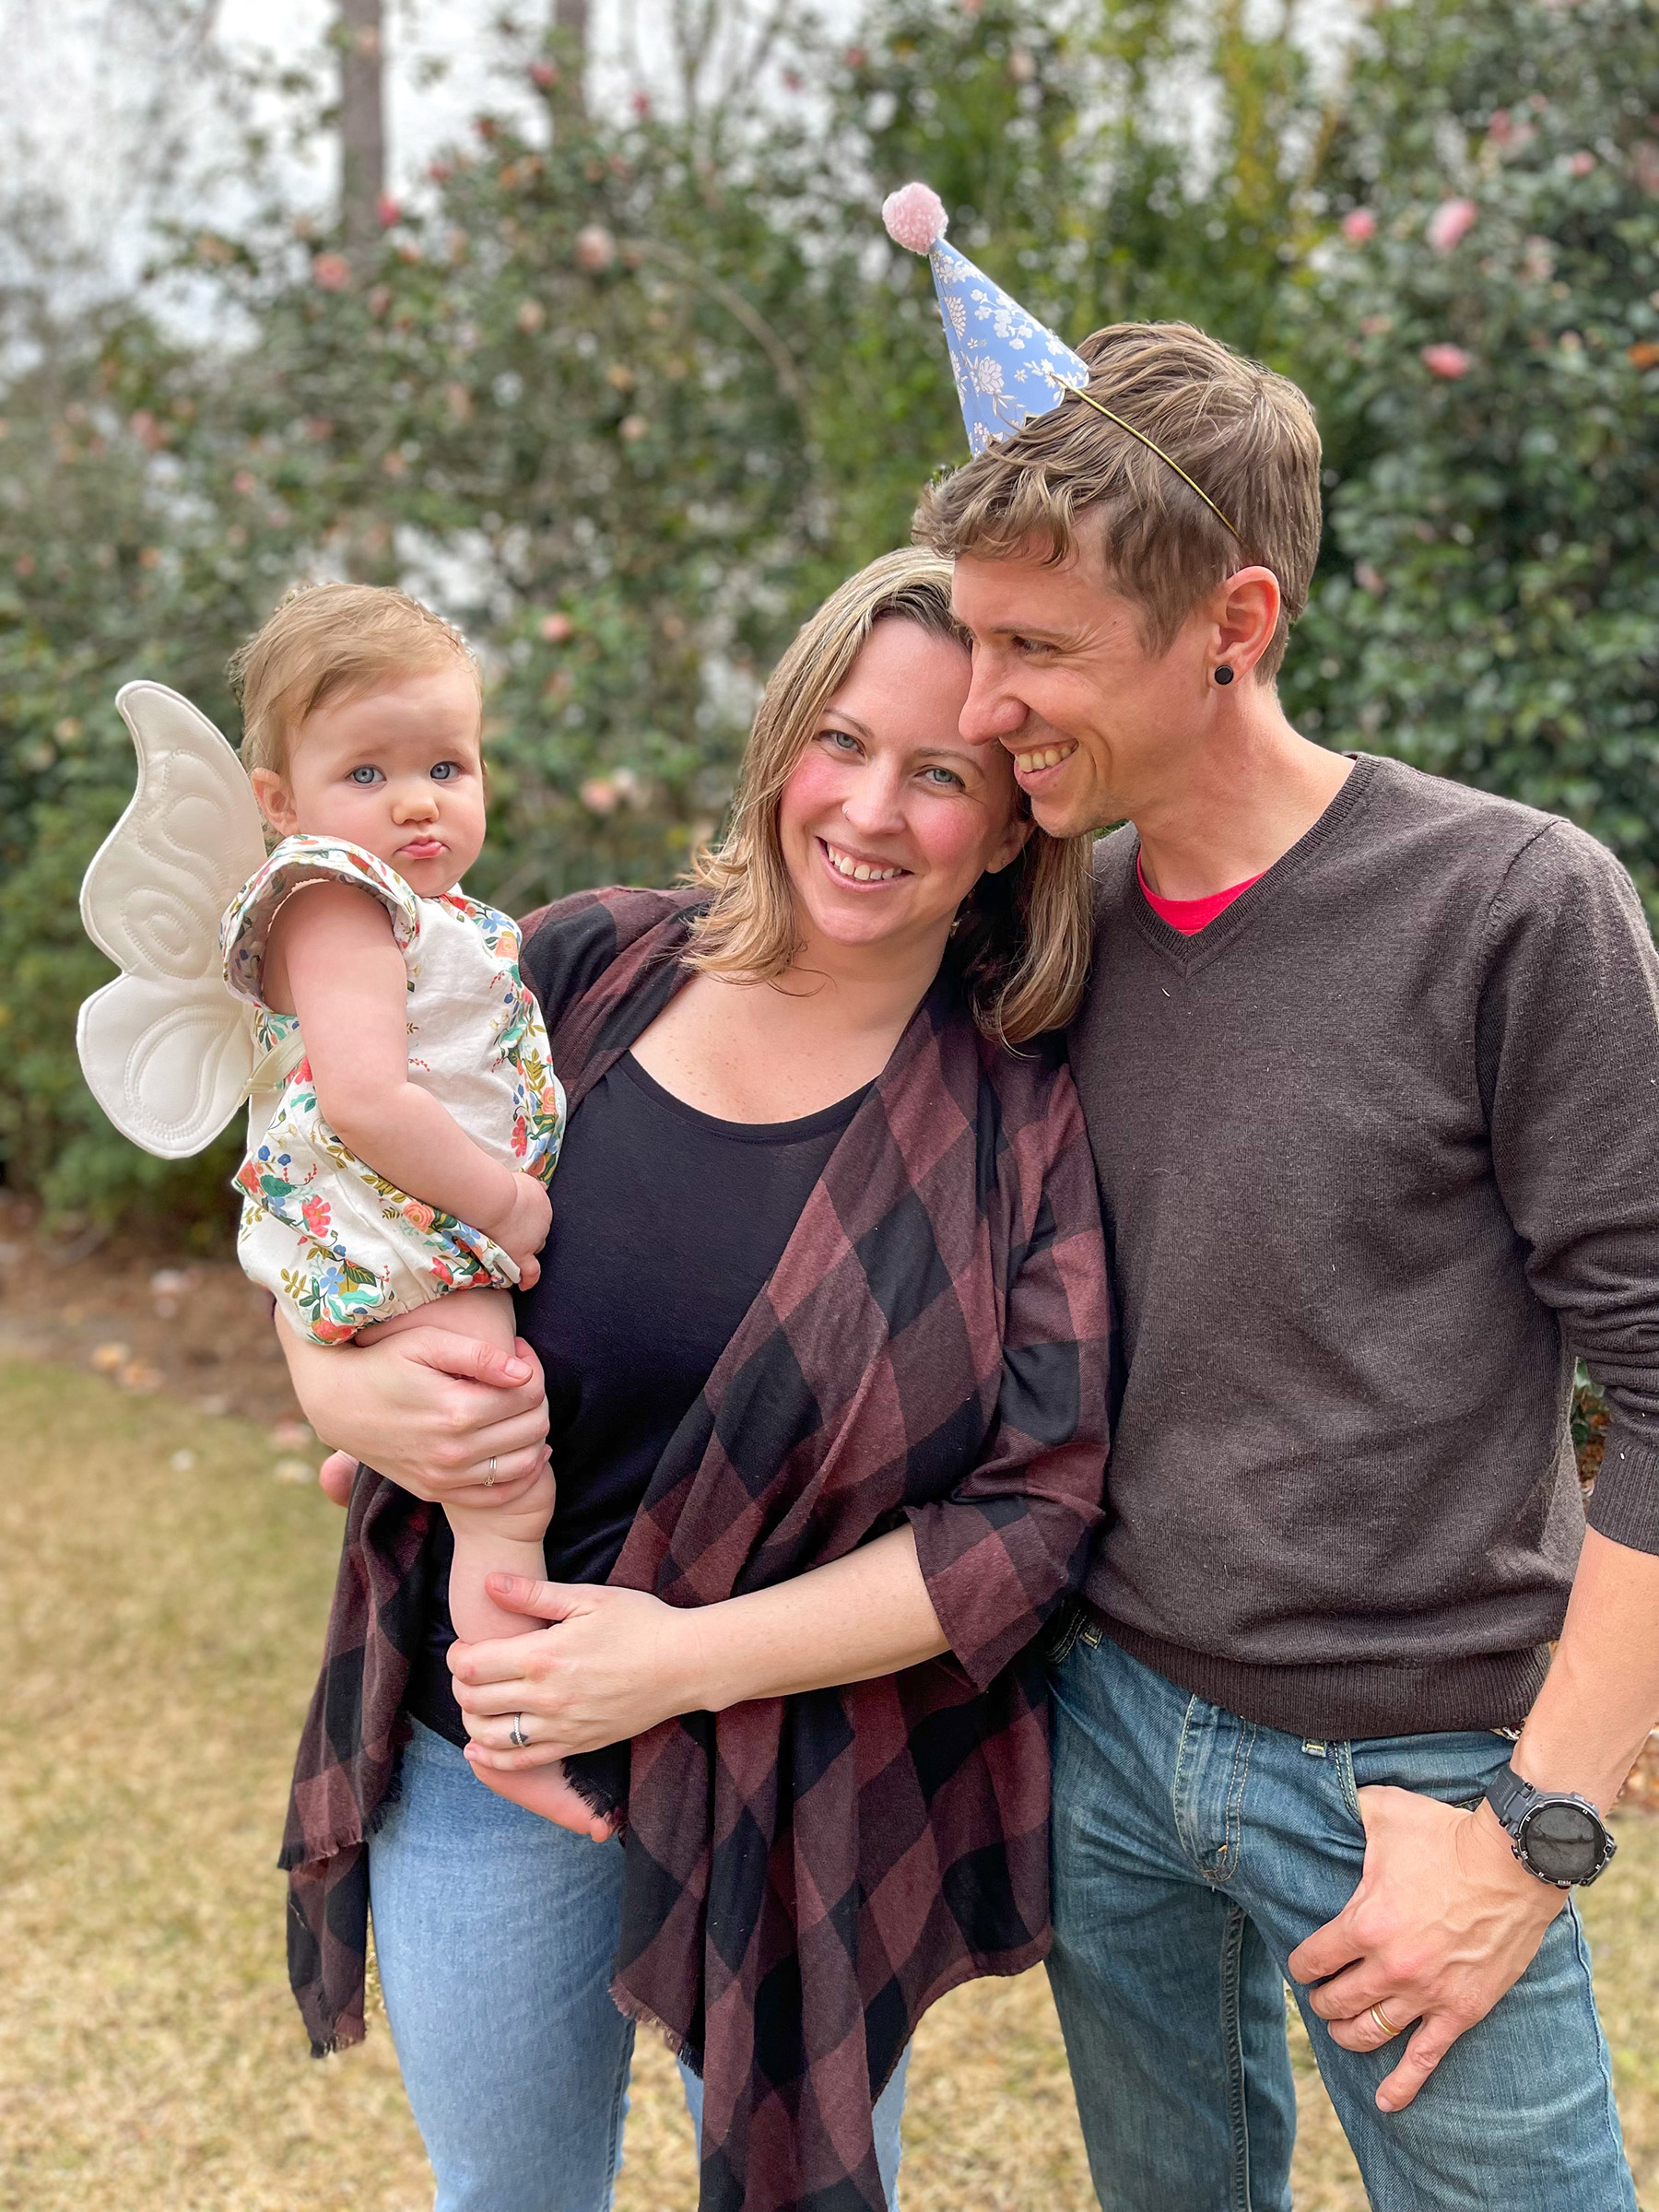 The author with her partner and daughter in Dothan, Ala., in February 2022.